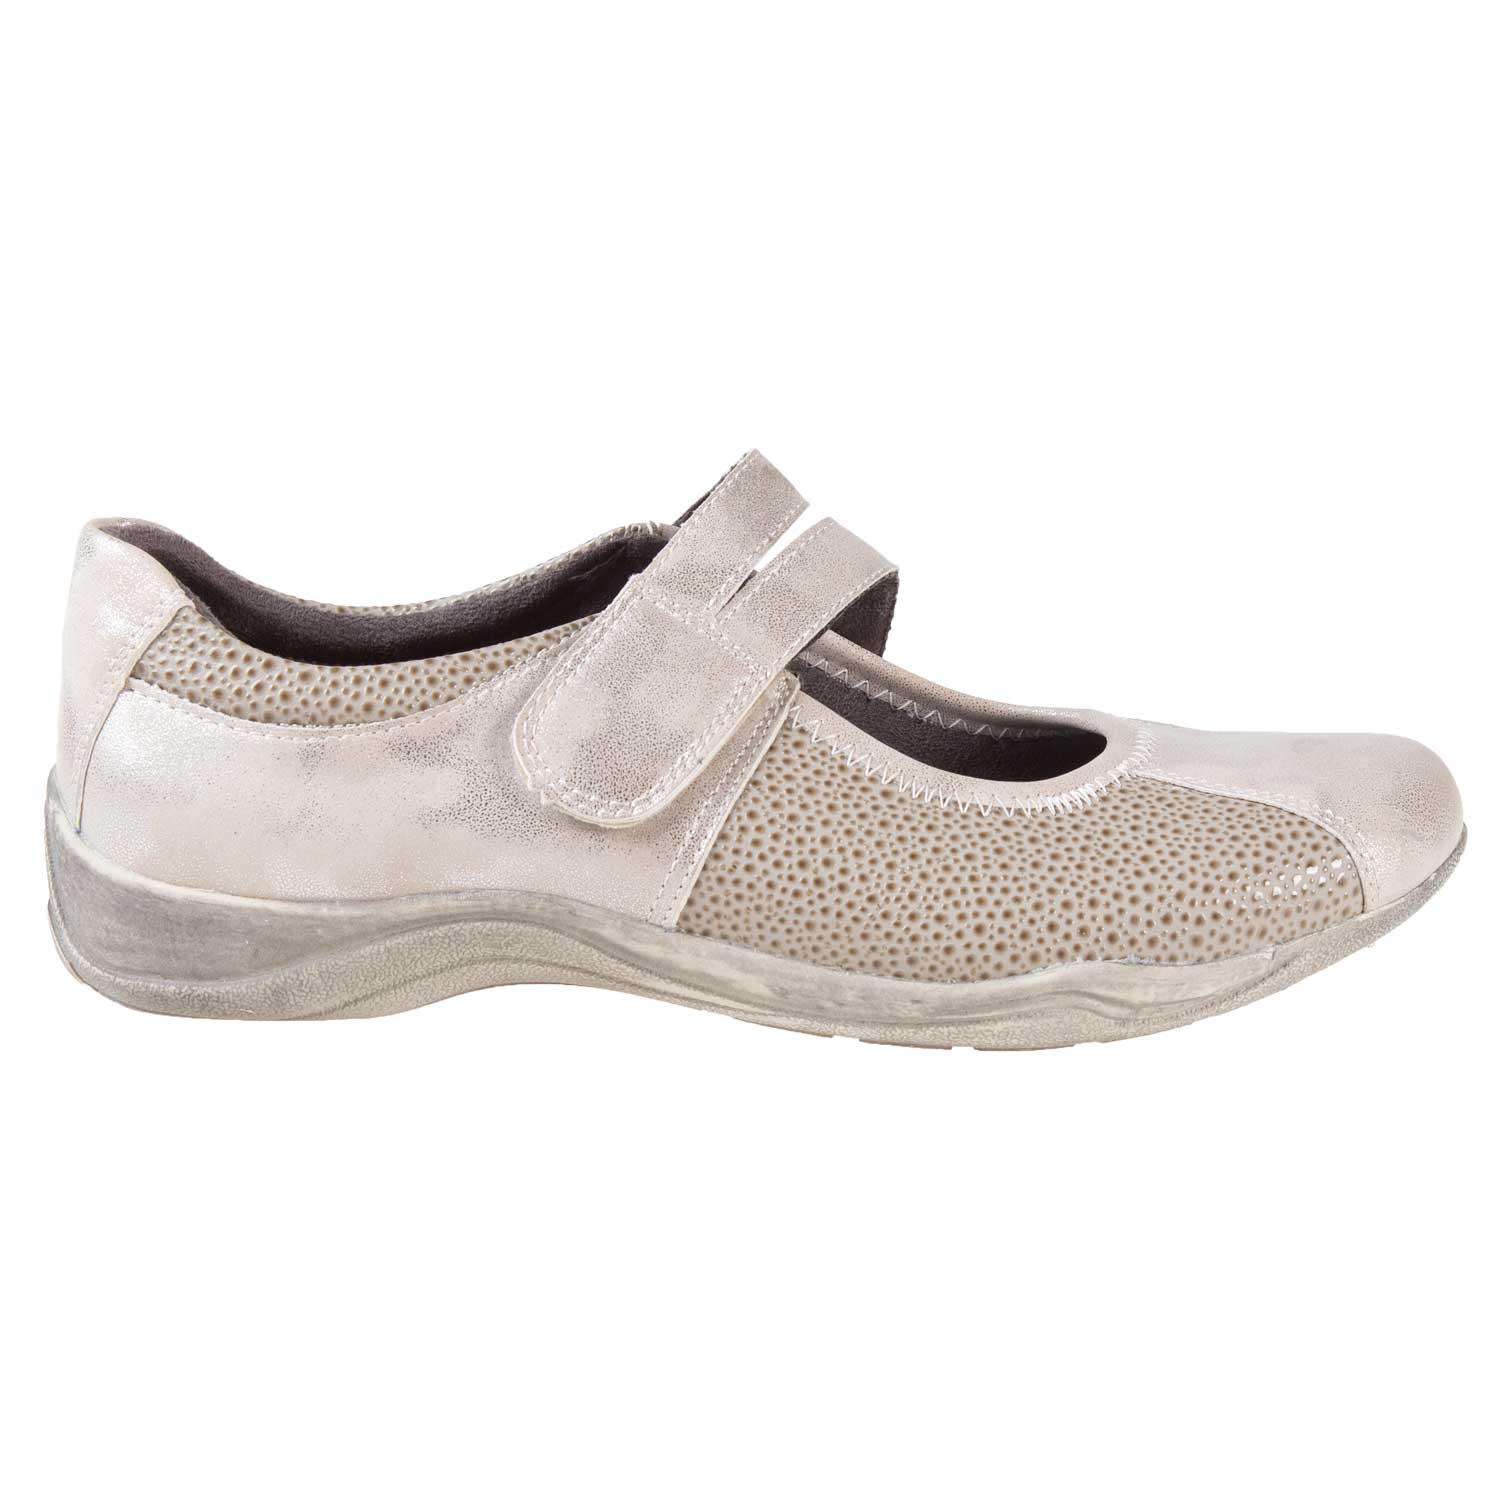 Women's round toe slip-on sports shoes with velcro closure, size 9